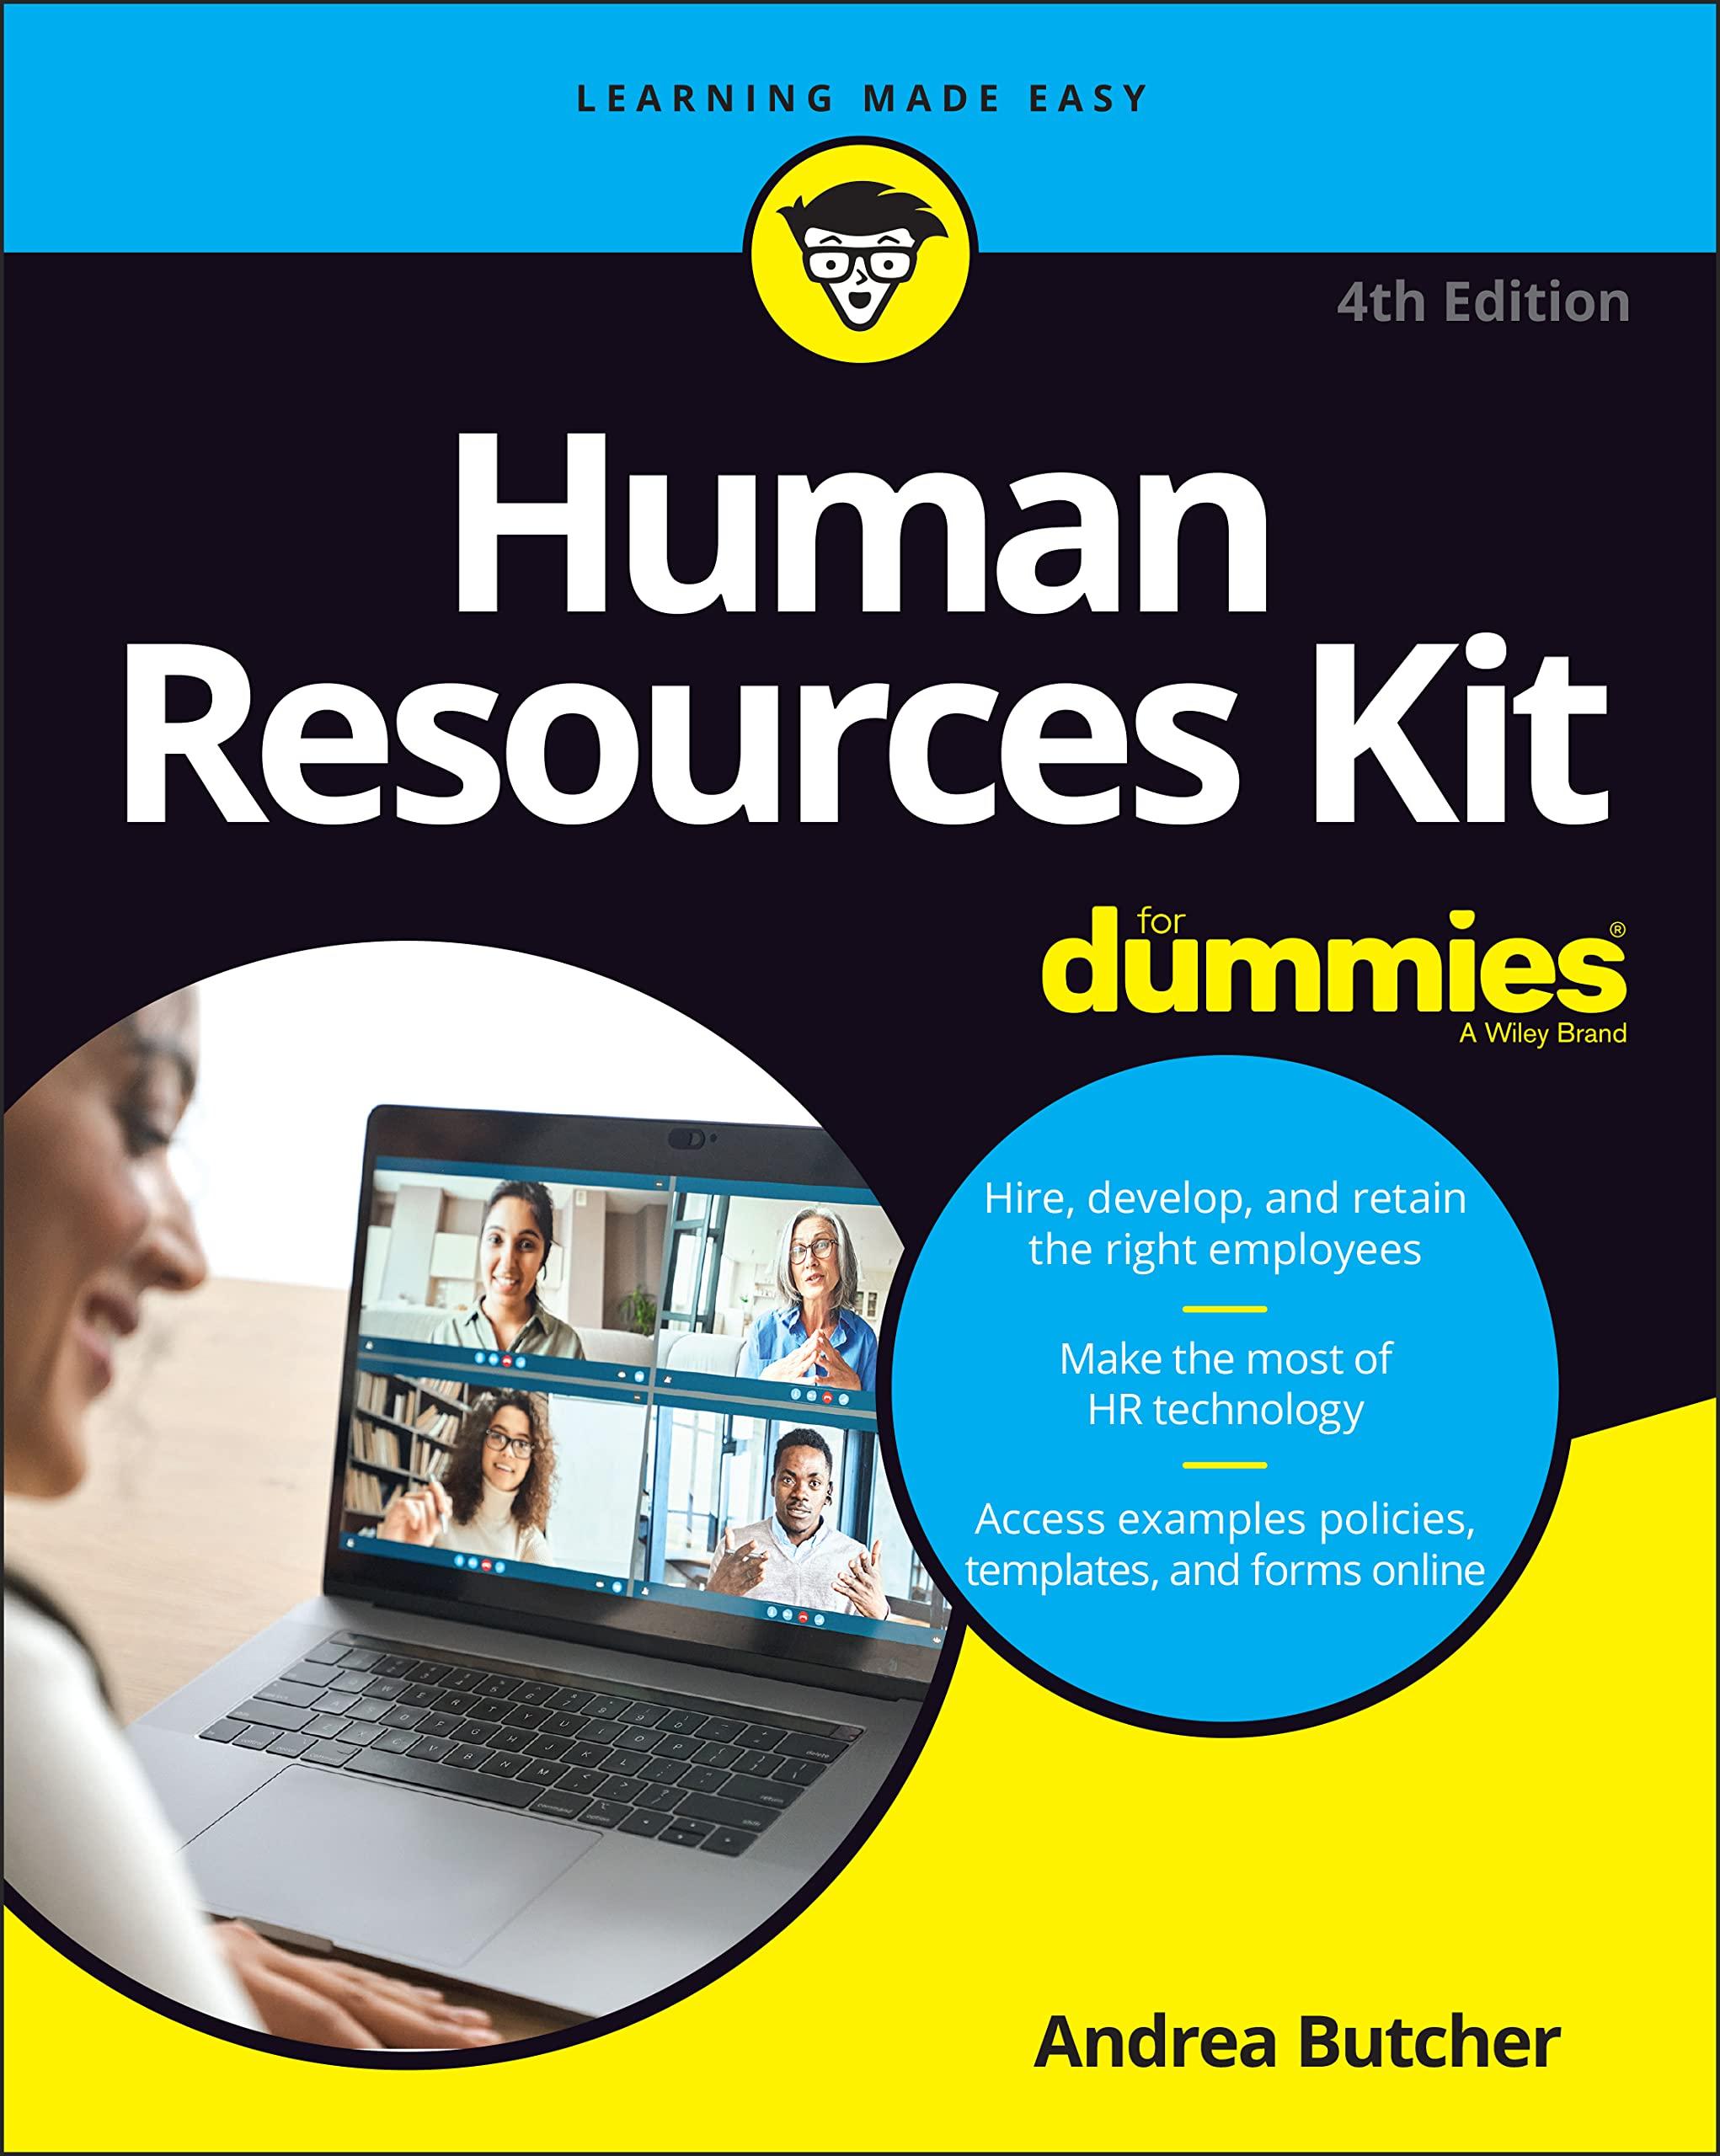 human resources kit for dummies 4th edition andrea butcher 1119989892, 978-1119989899